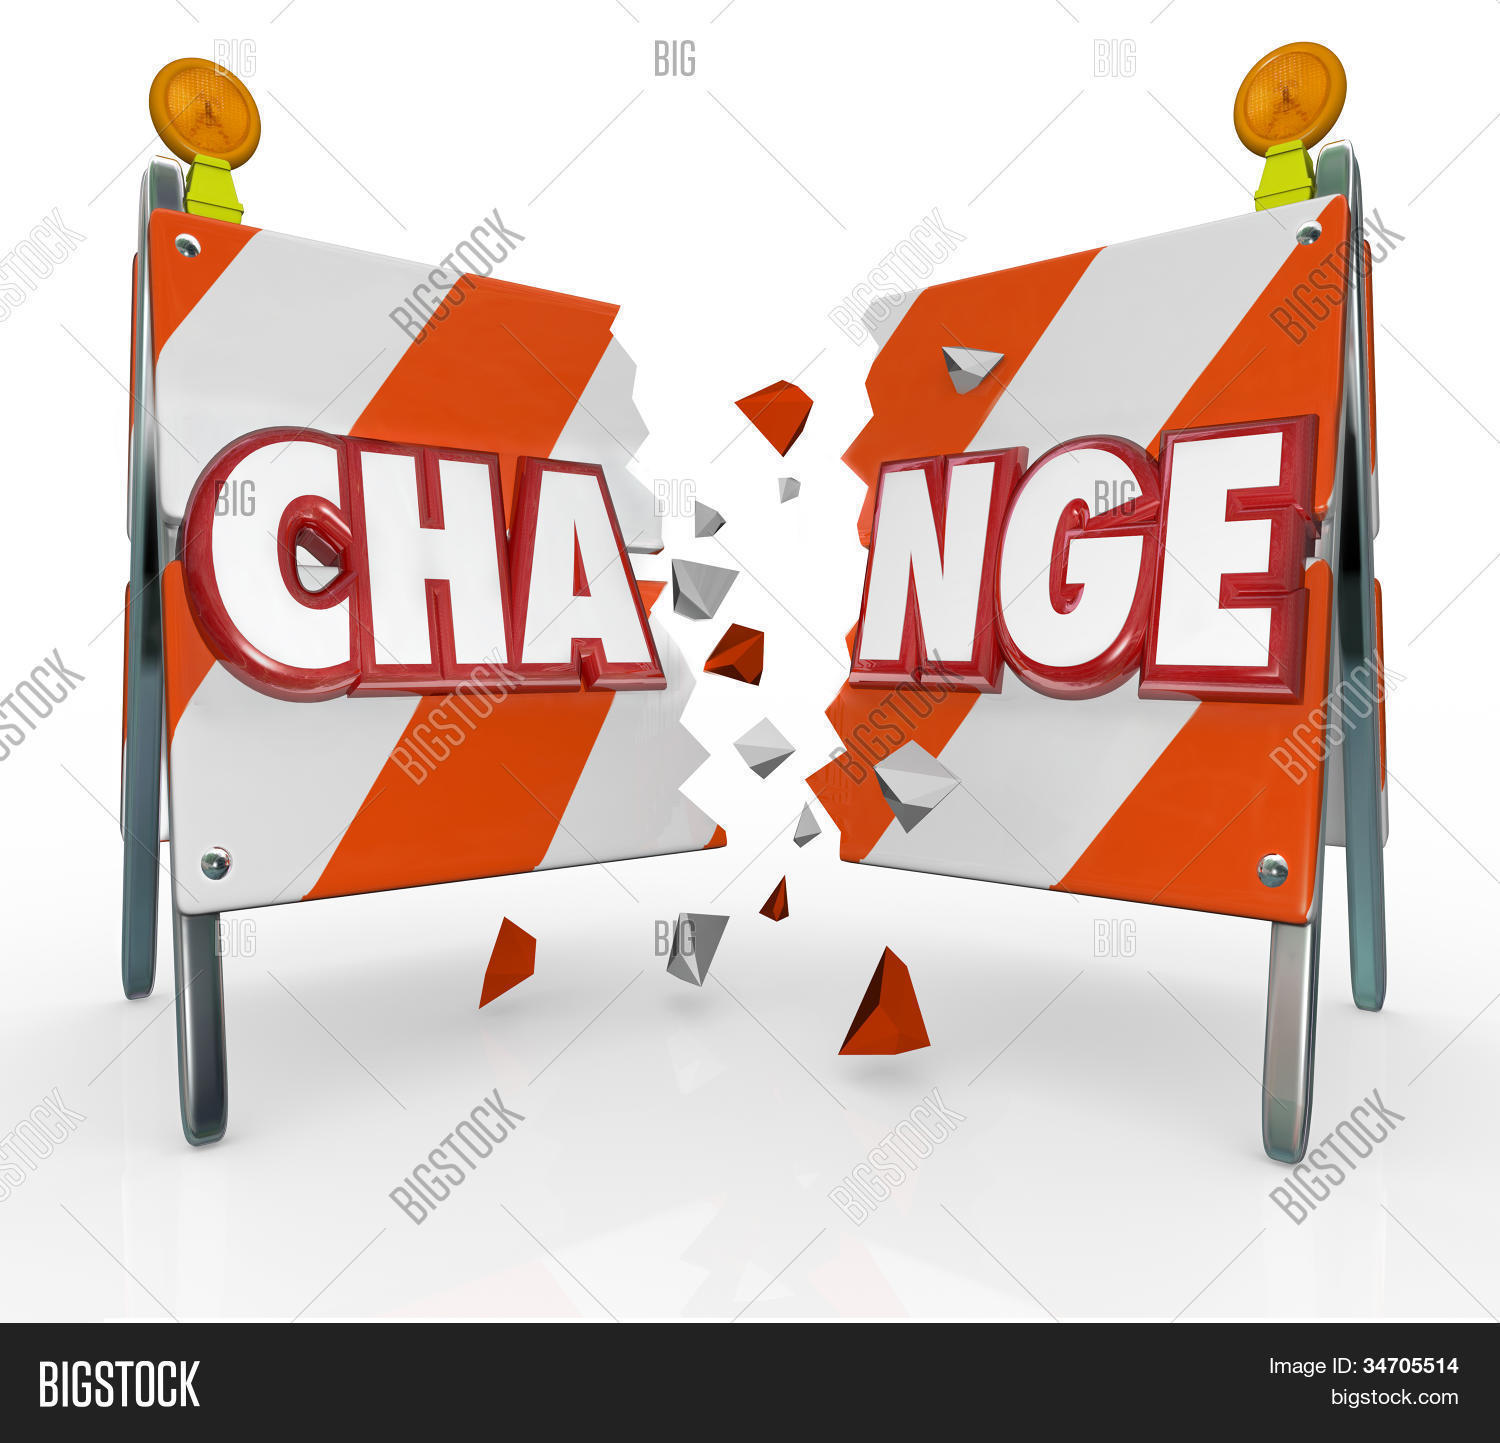 The word Change on a barrier being broken through to allow for.